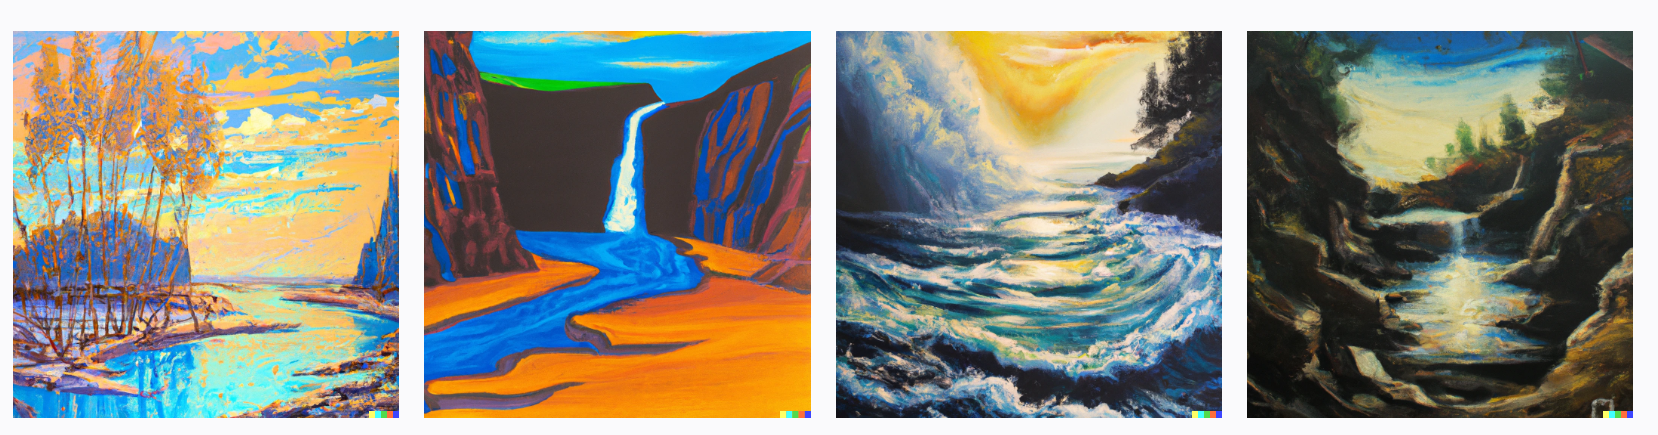 Mix Salvador Dali, Monet, Manet, Polenov, Korovin, Miro, Malevich and make a canvas acryl sunset with the sea, rocks, sand dunes, forest, waterfall and river, digital art